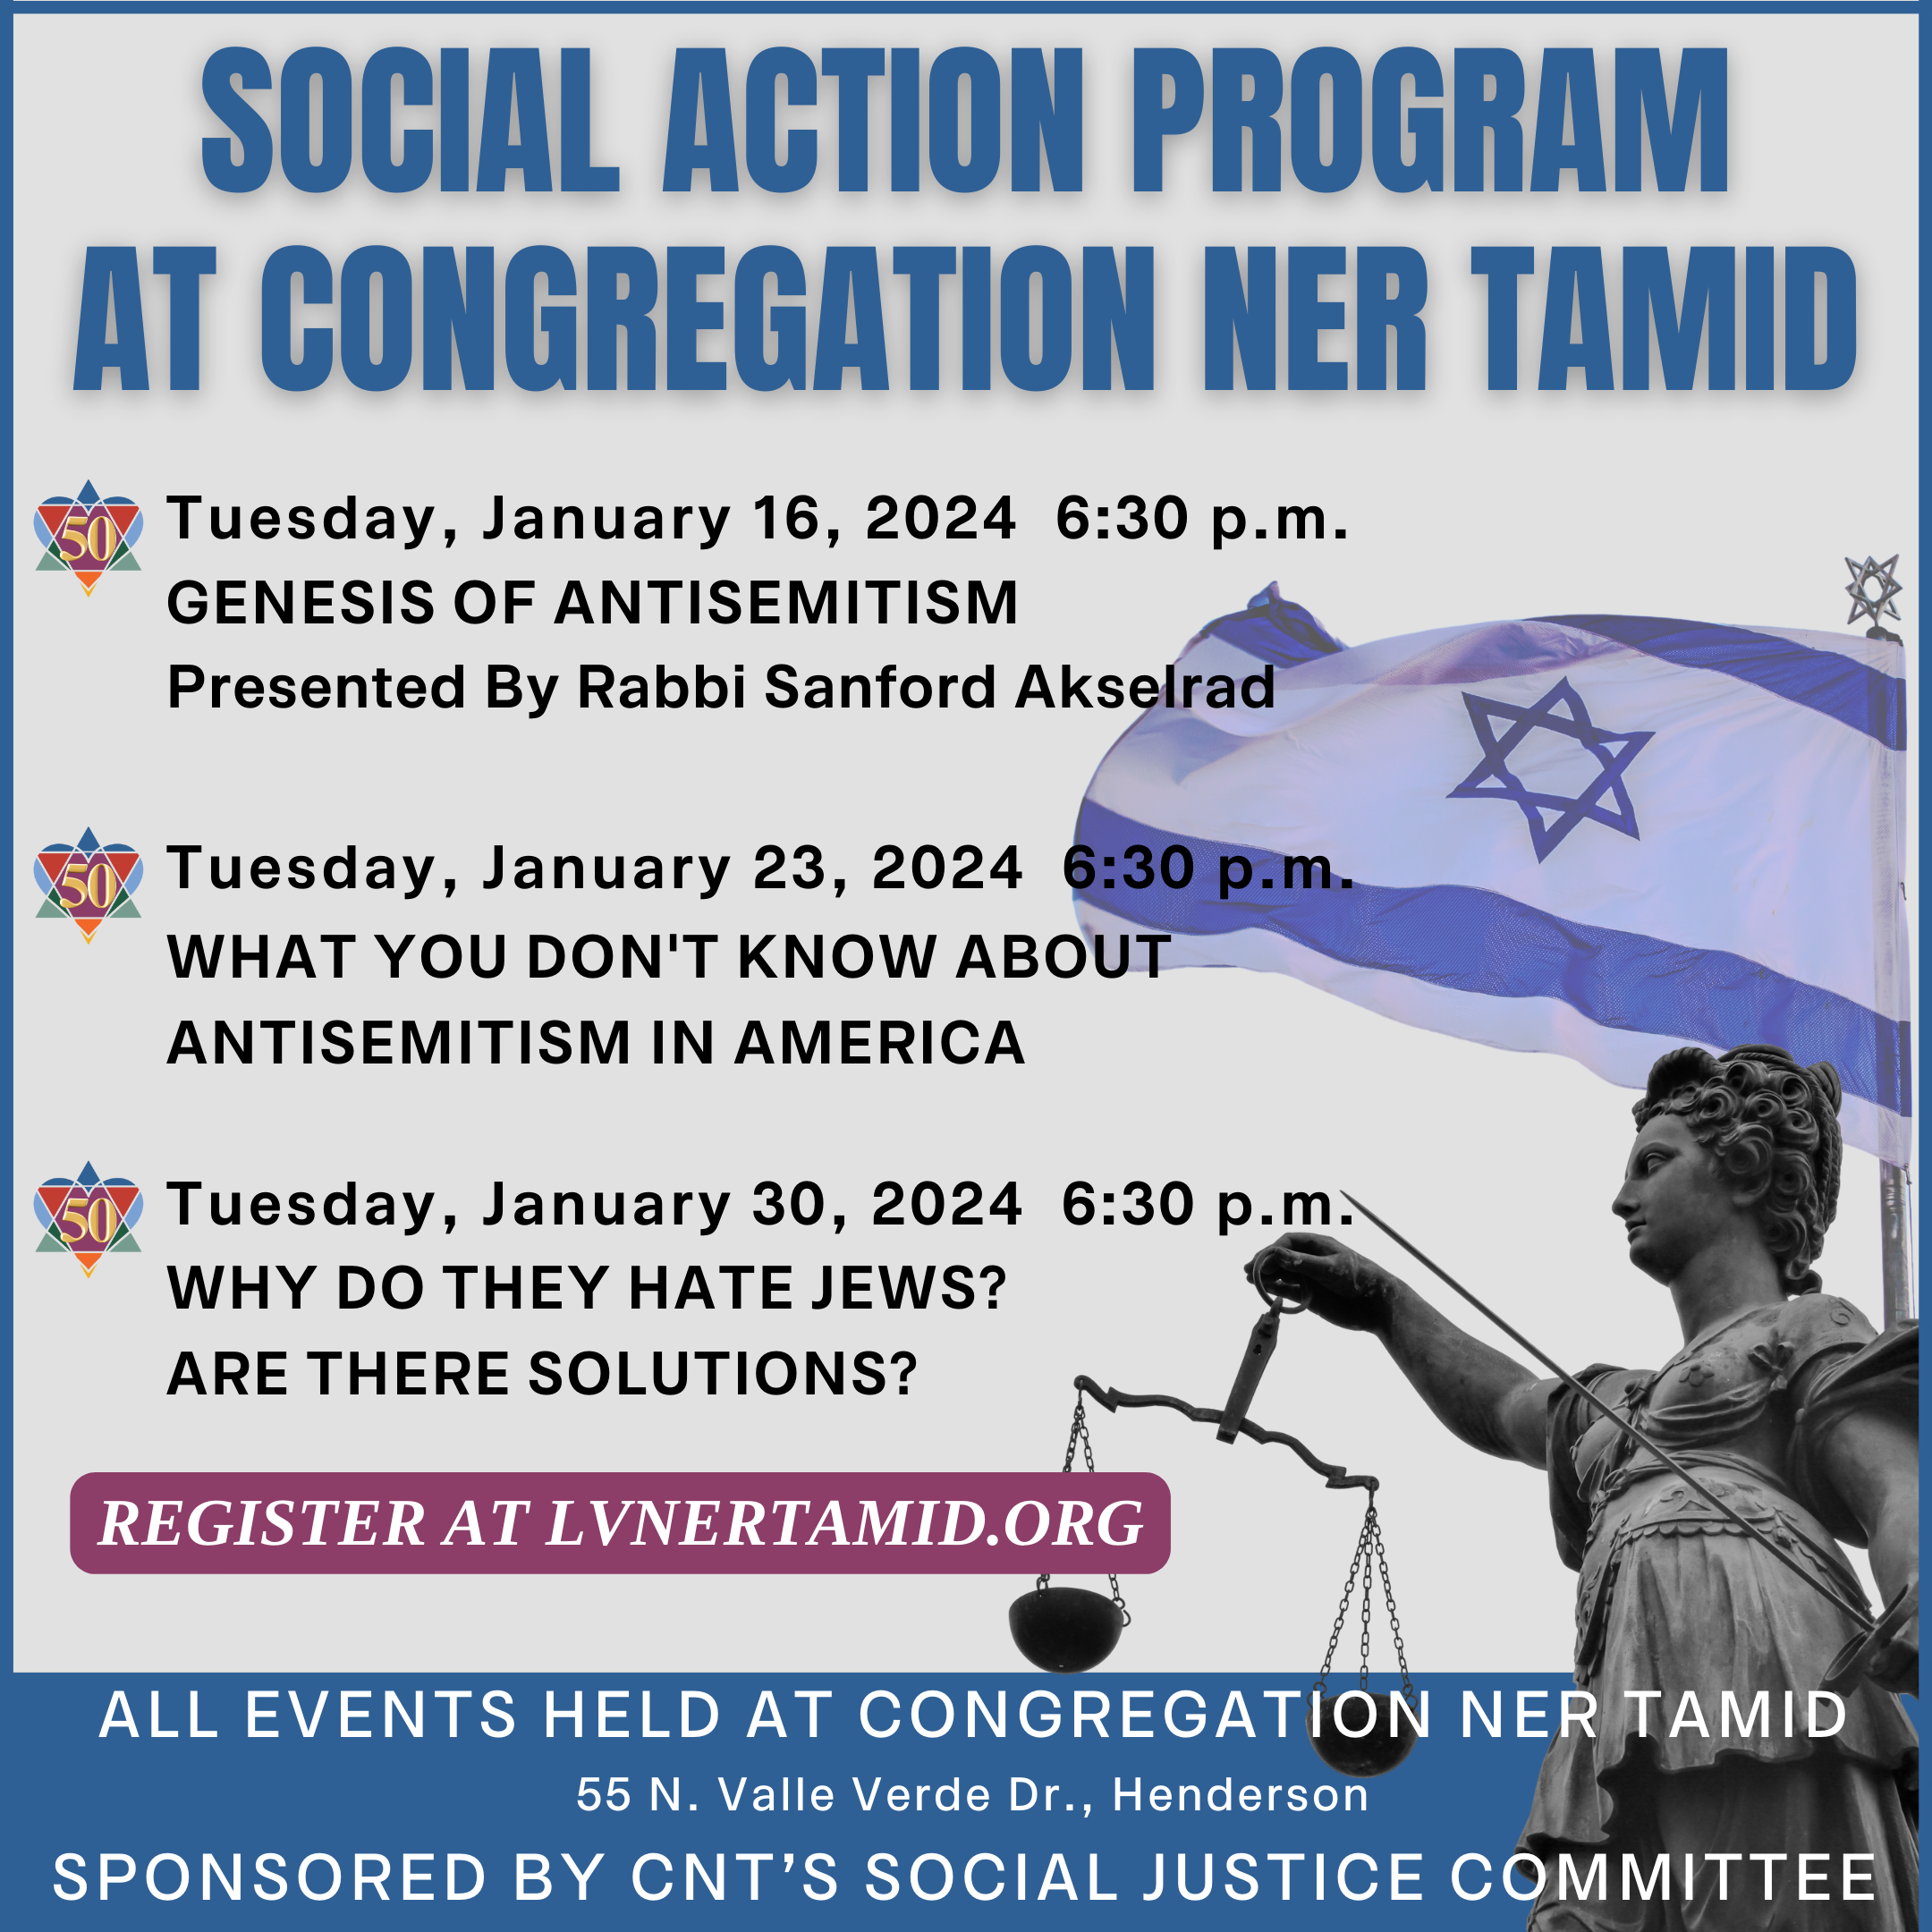 CNT'S SOCIAL ACTION COMMITTEE PRESENTS 'WHY DO THEY HATE JEWS? ARE THERE SOLUTIONS?'